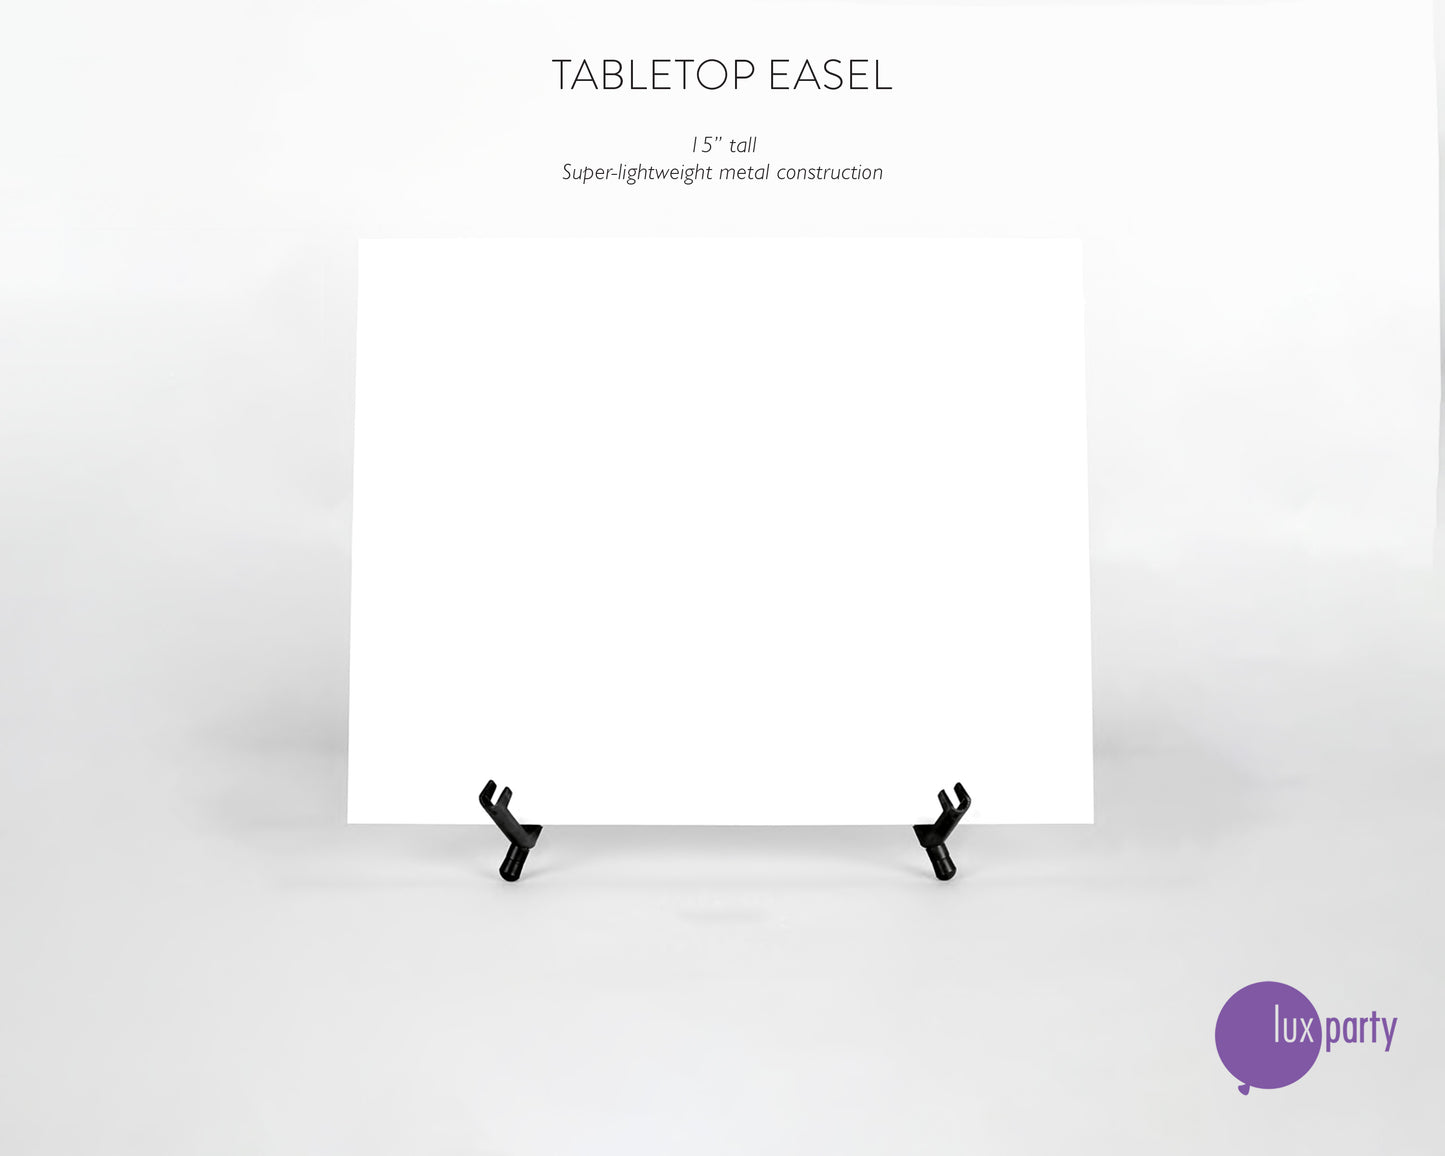 Black lightweight metal tabletop easel, holding a blank white sign, against a white background. Lux Party logo.